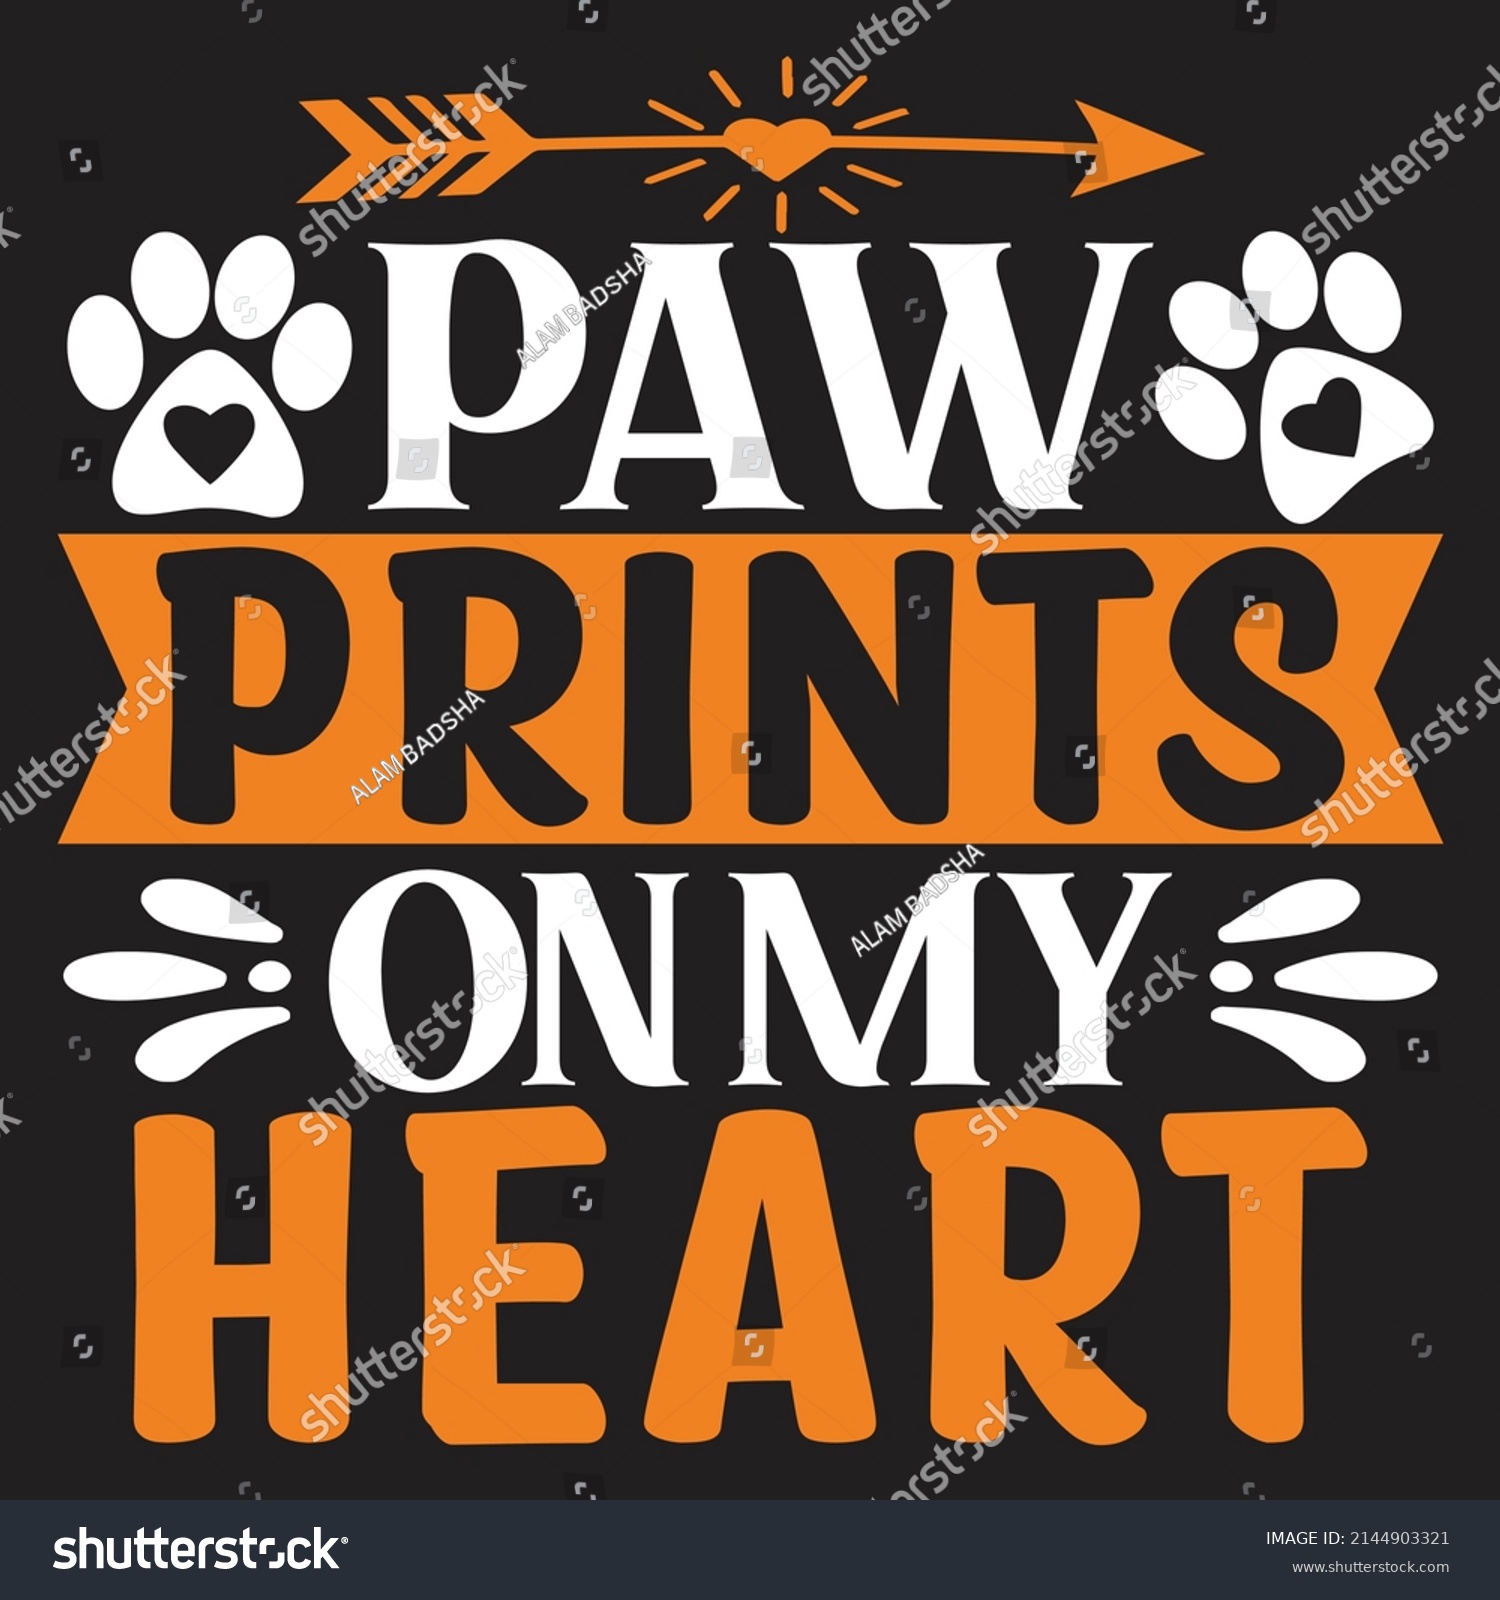 SVG of Paw Prints on My Heart - Dog T-shirt And  SVG Design, Vector File. svg